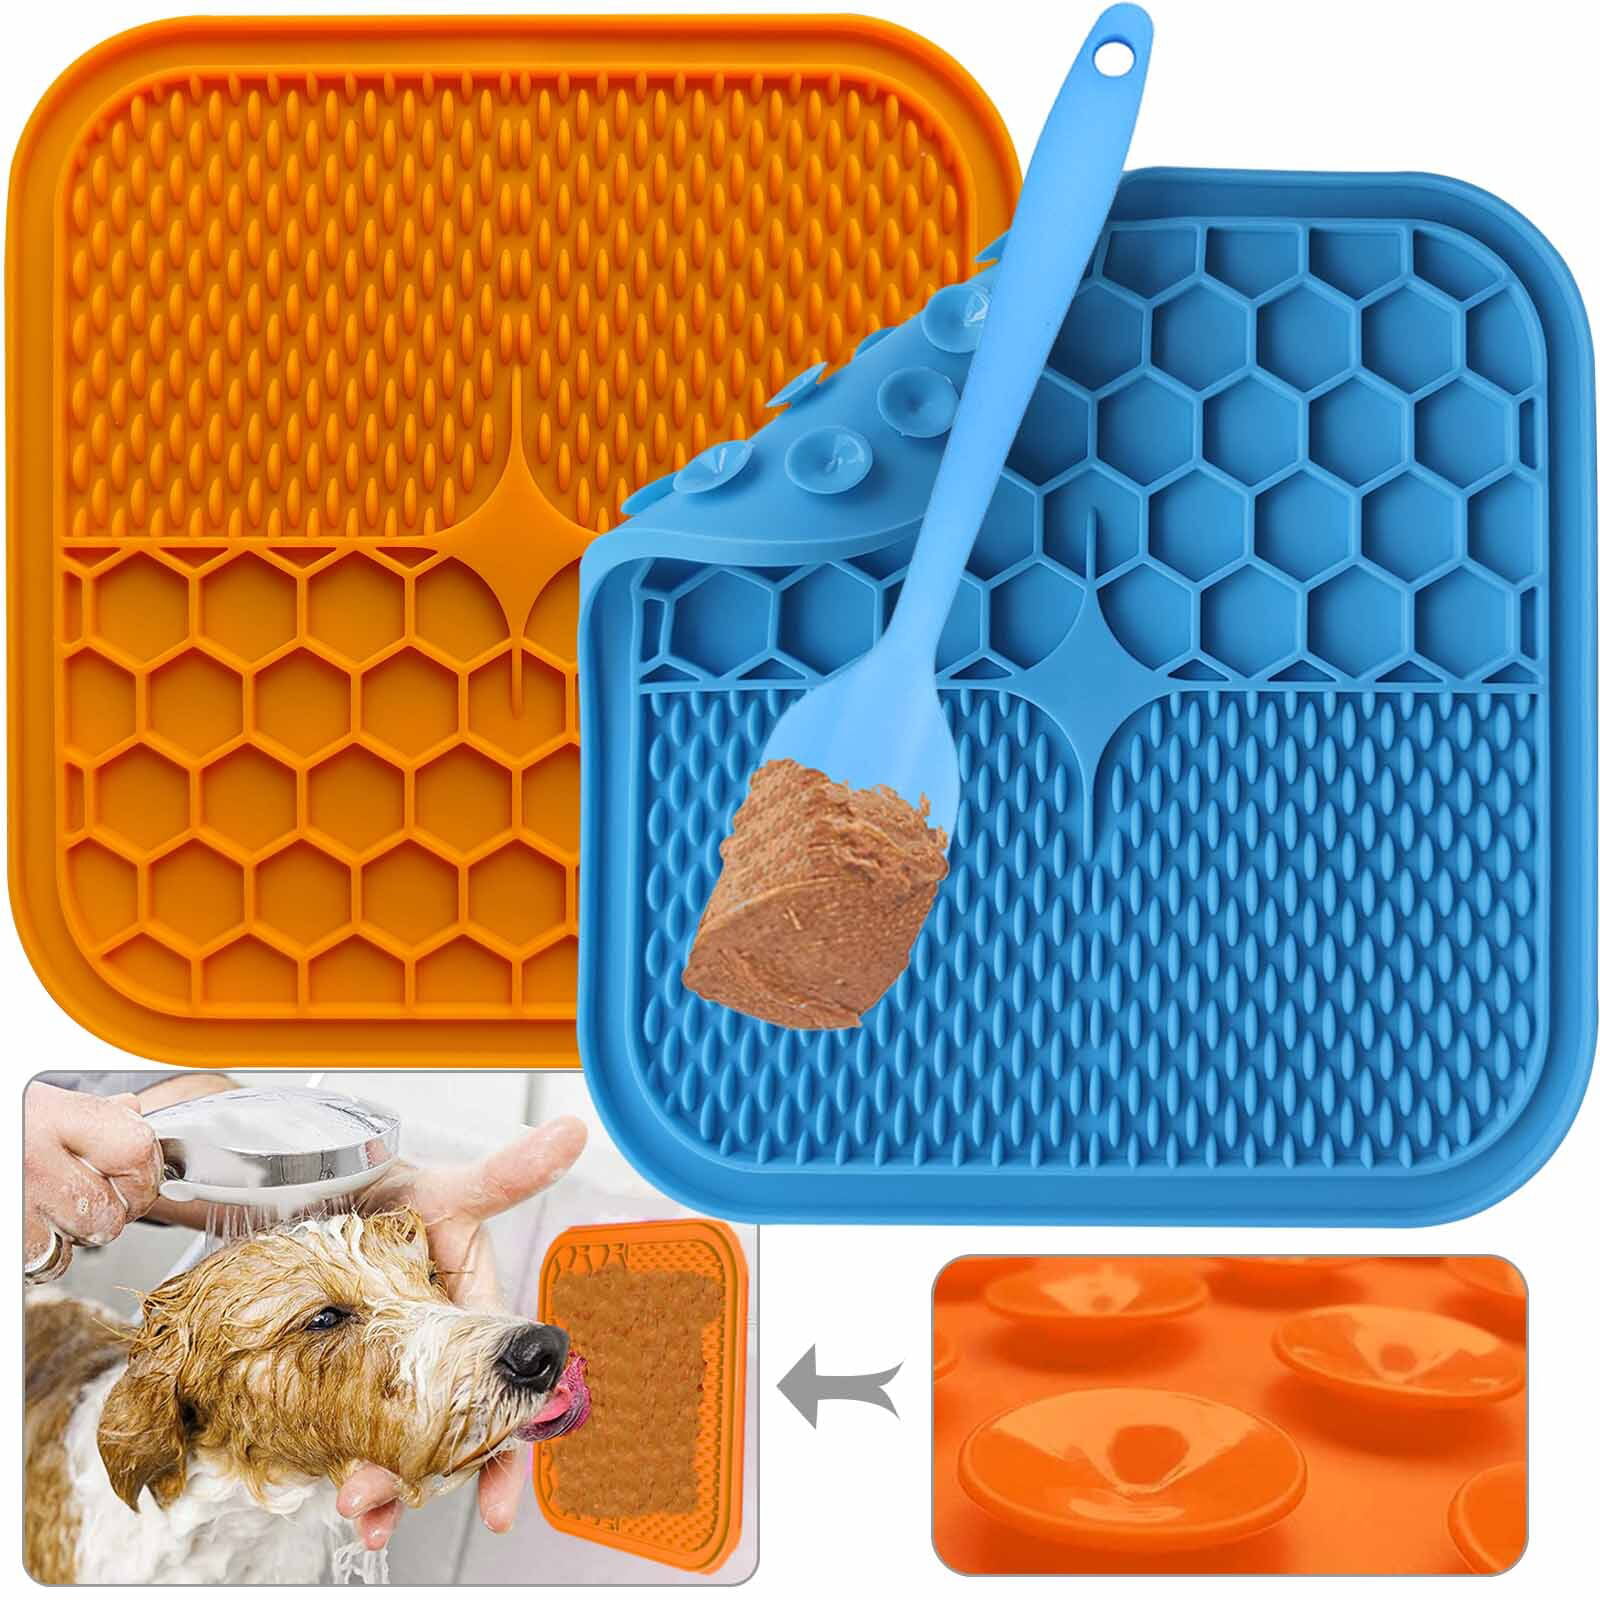 Diggs Groov Treat Dispenser Dog Toy and Crate Training Aid, Turquoise -  Walmart.com